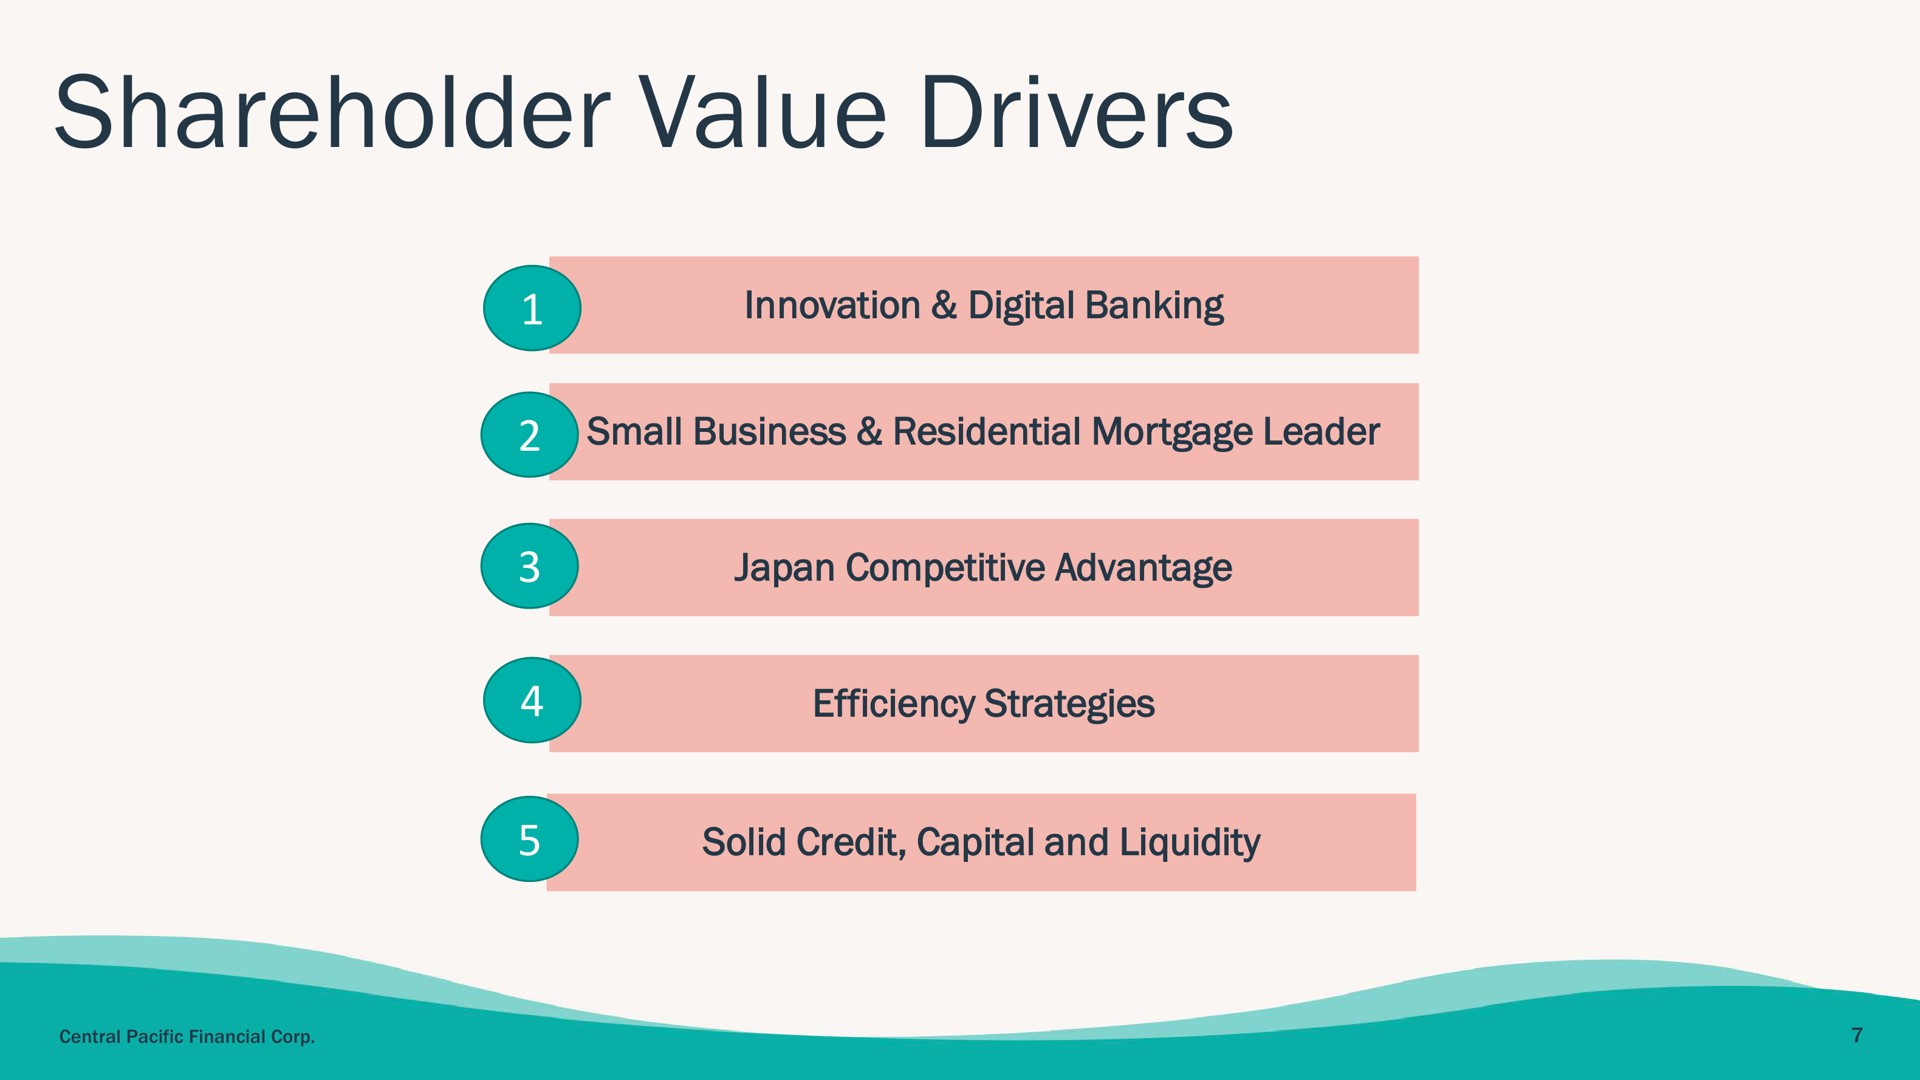 shareholder value drivers | Central Pacific Financial